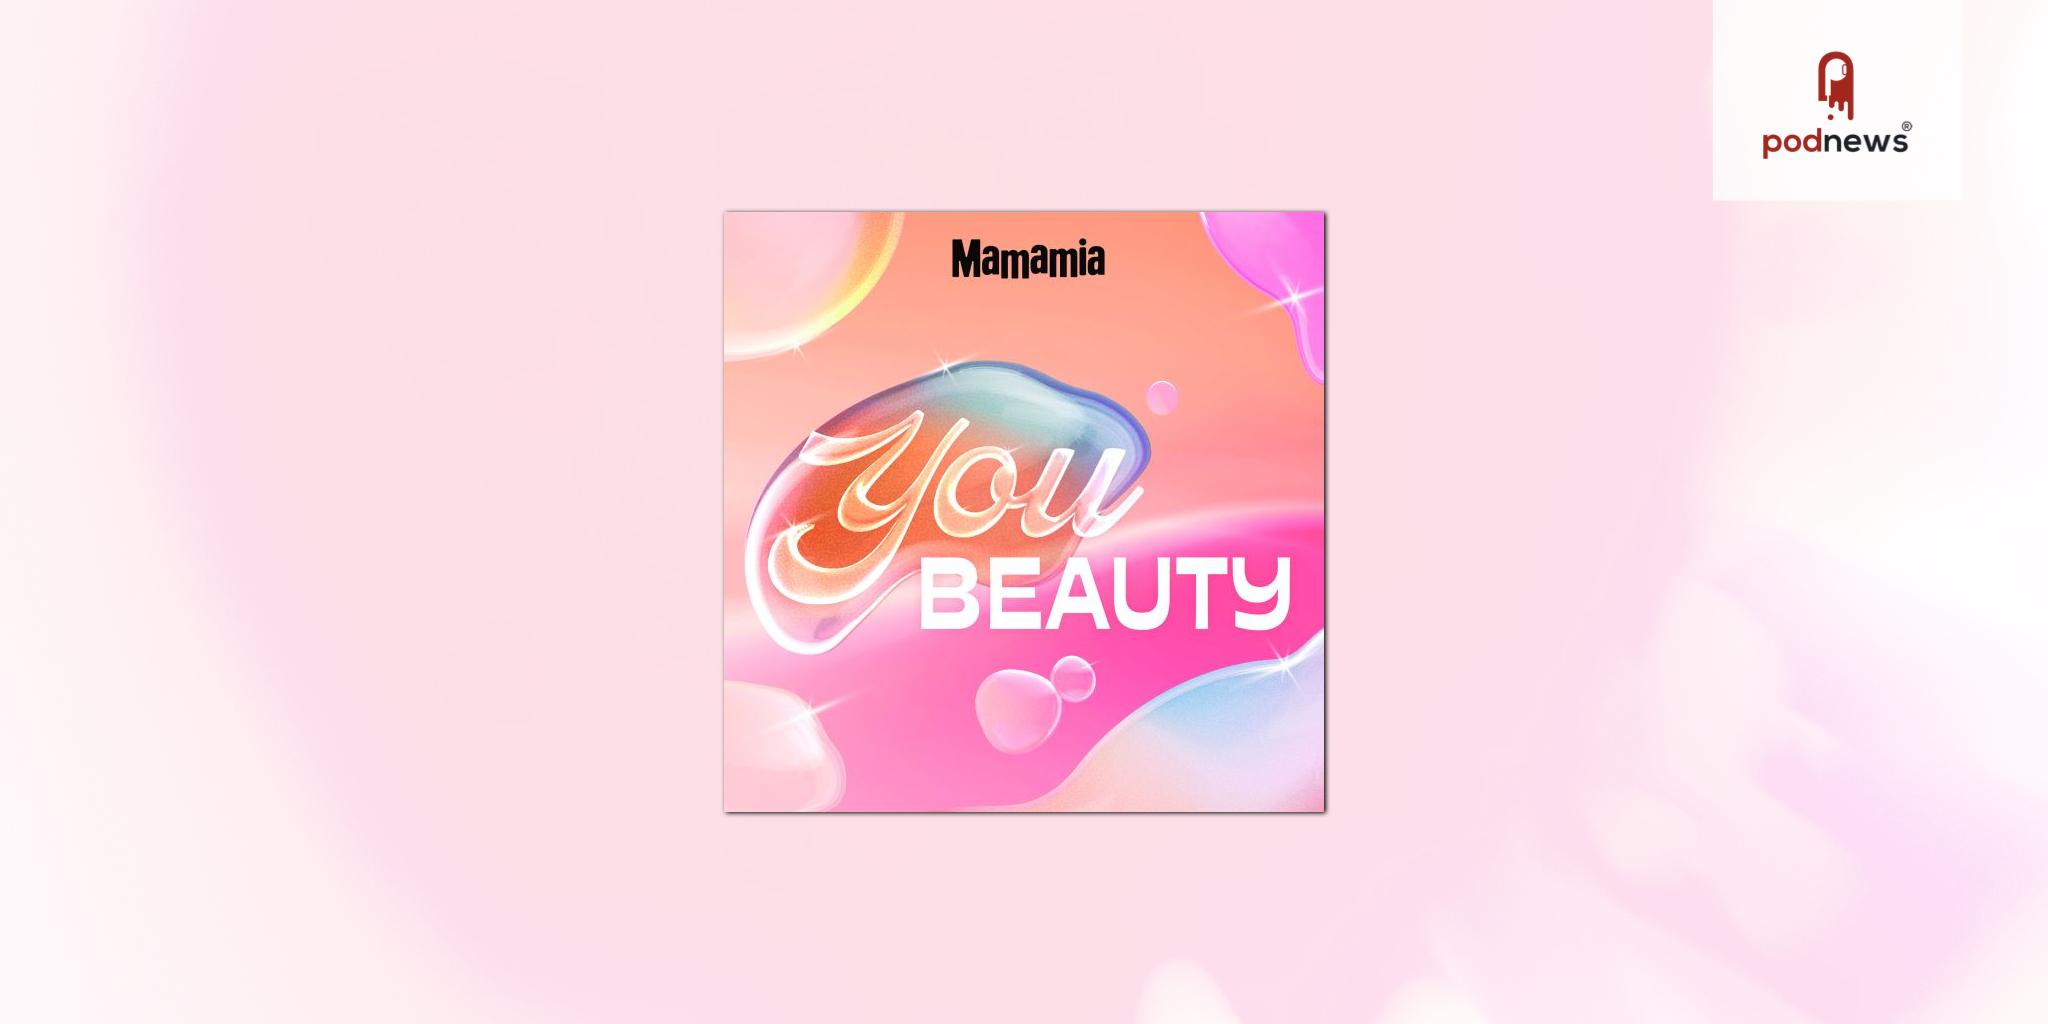 Mamamia To Launch Australia’s First Daily Beauty Podcast